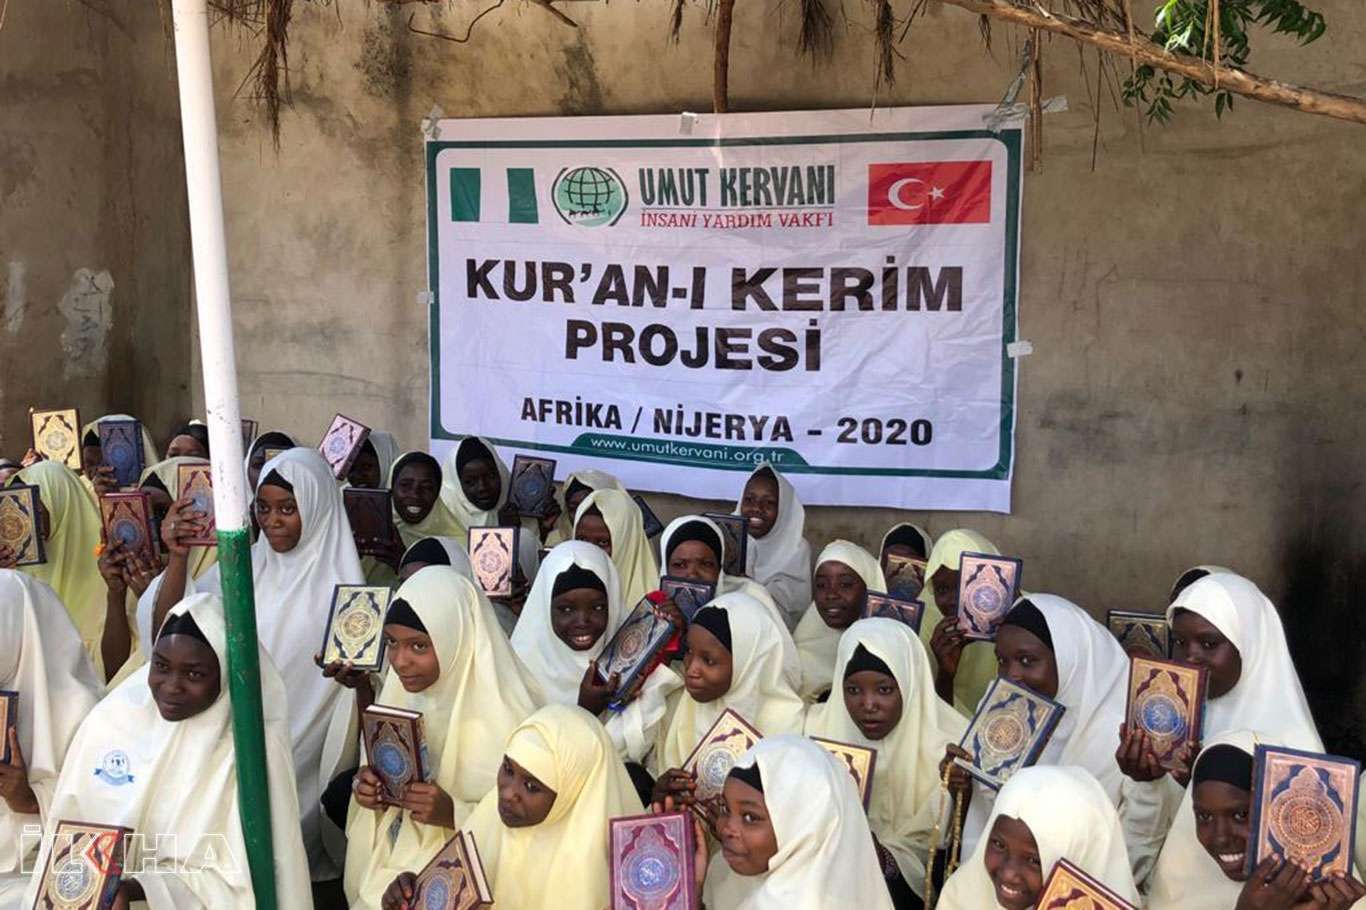 Hope Caravan Foundation distributes copies of Holy Quran to madrasah students in Africa